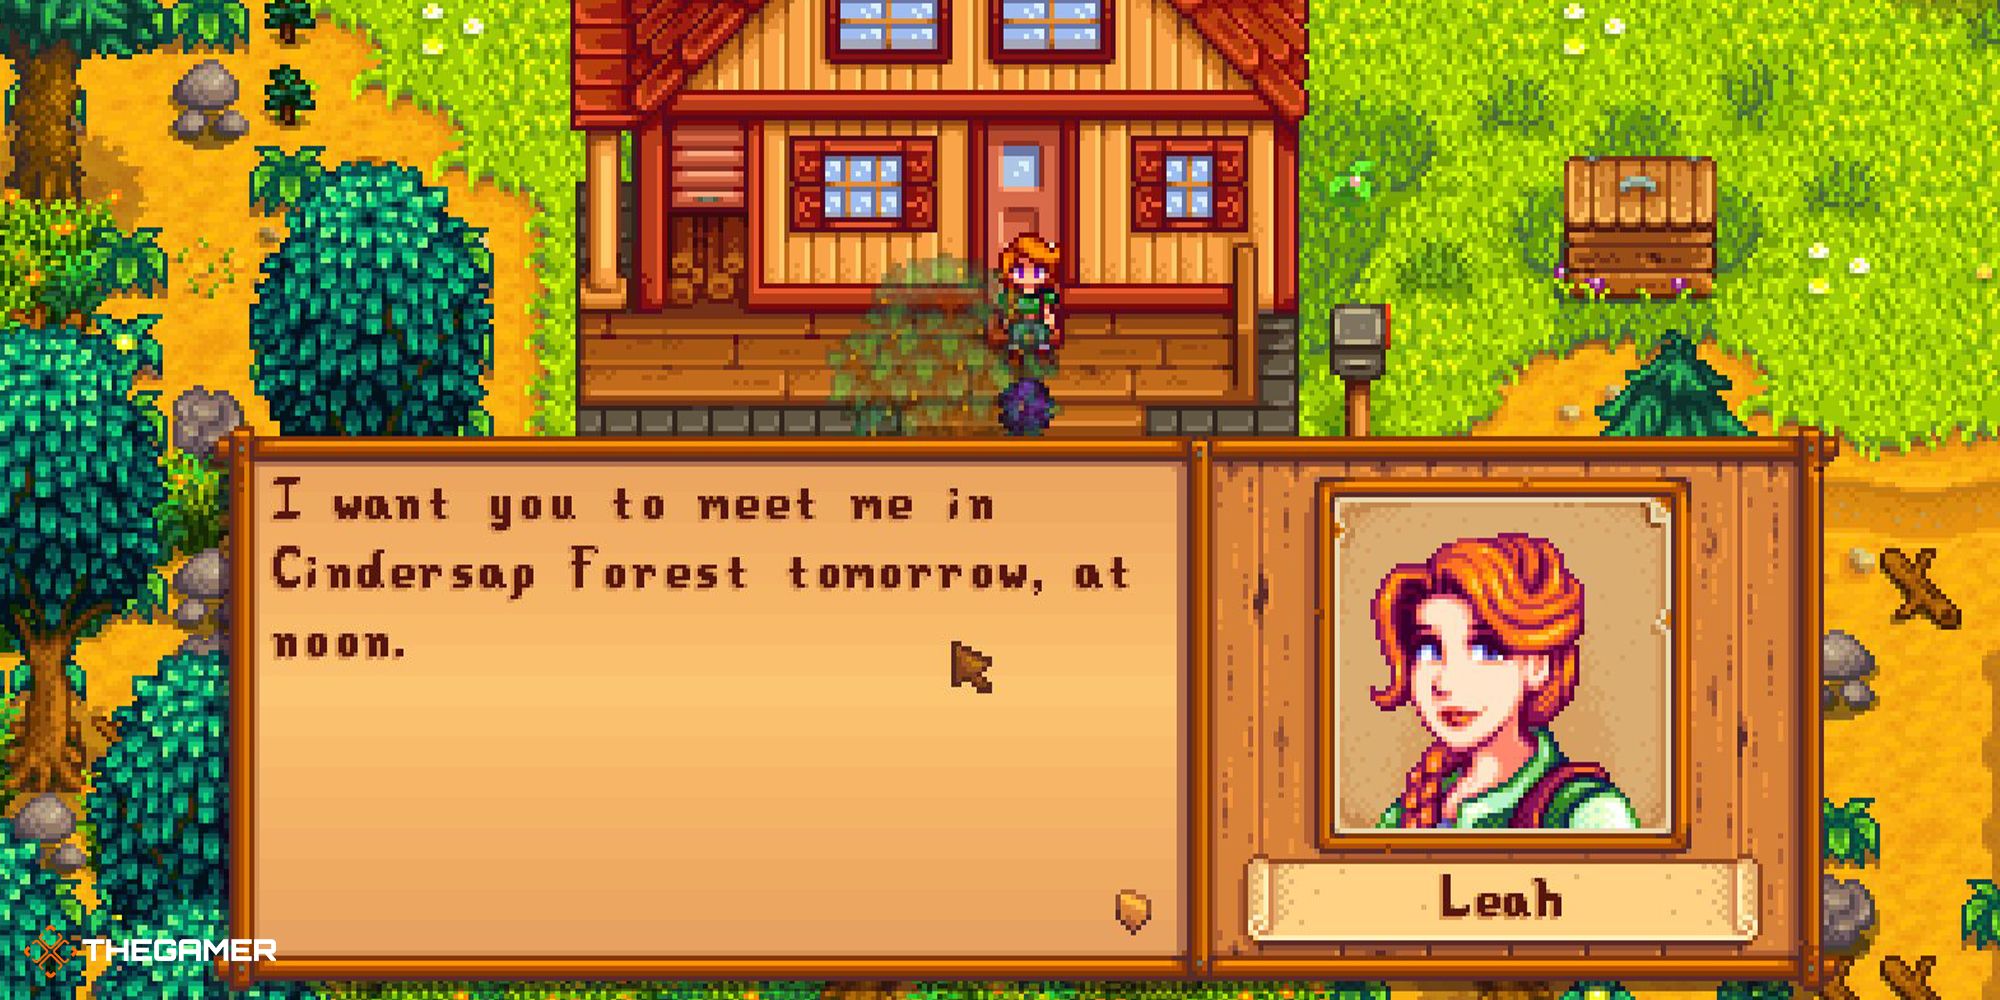 Stardew Valley - Leah 14 heart event 2